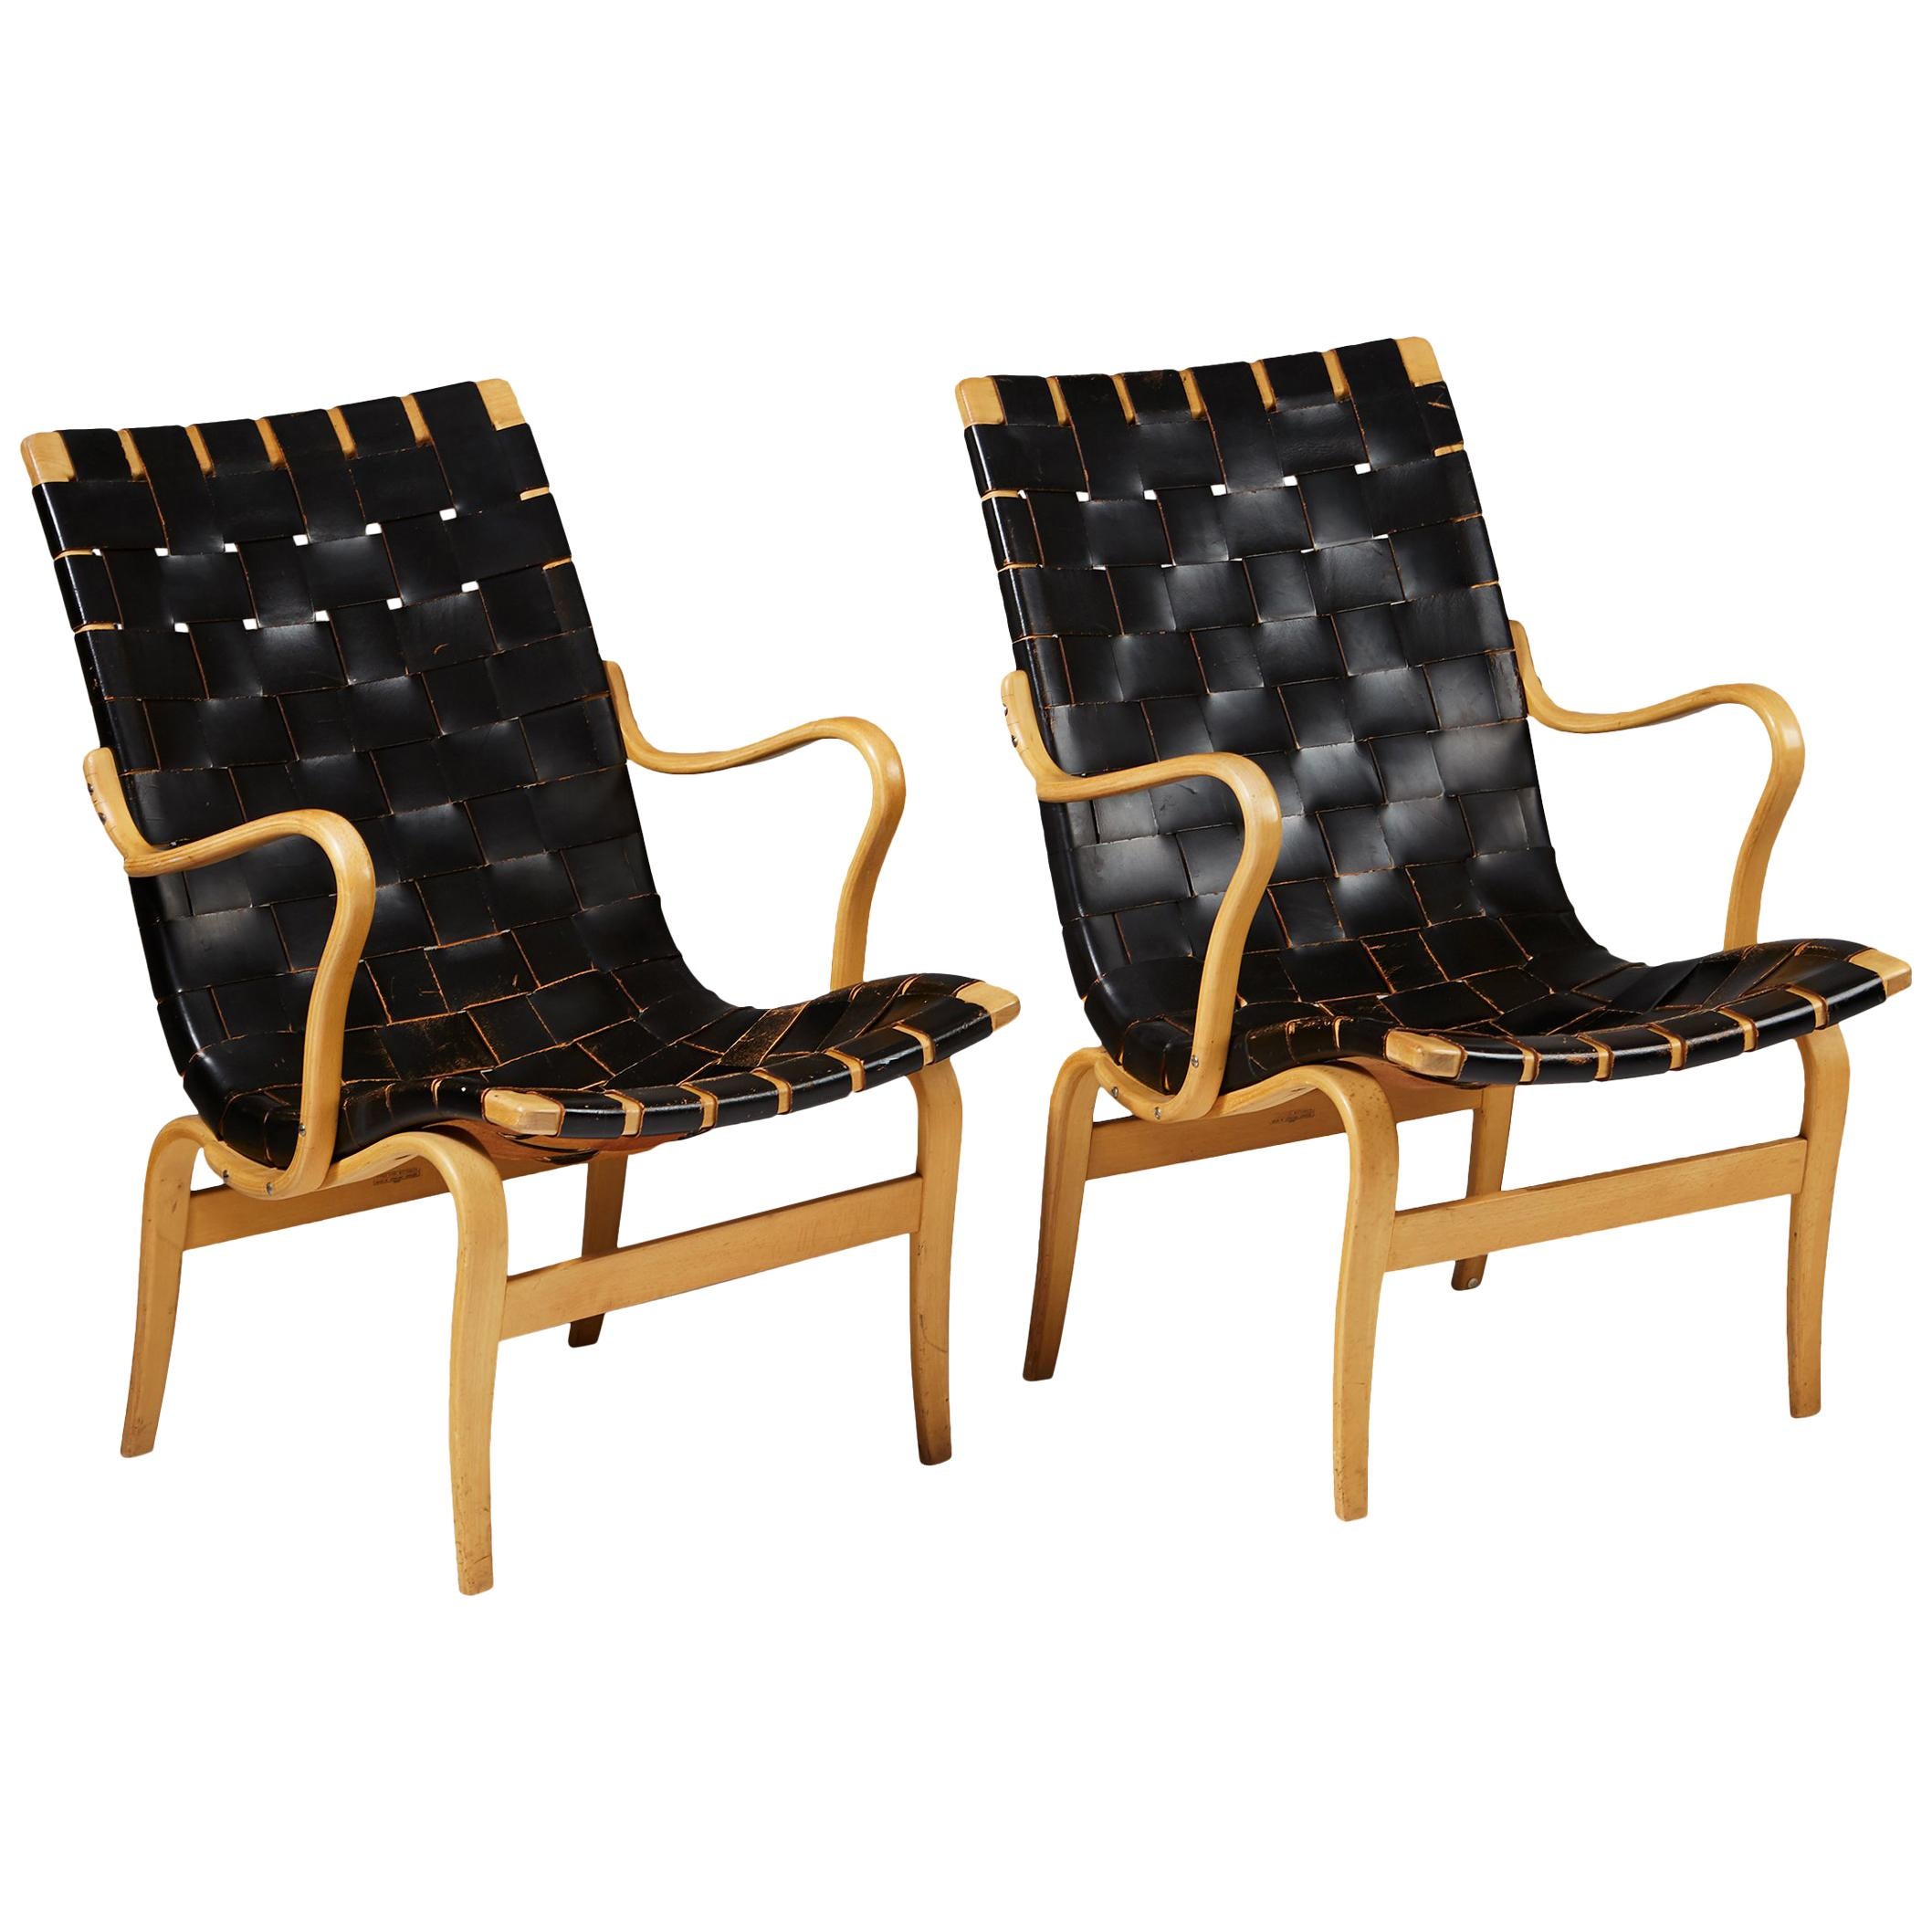 Pair of Armchairs Eva Designed by Bruno Mathsson for K. Mathsson, Sweden, 1960s